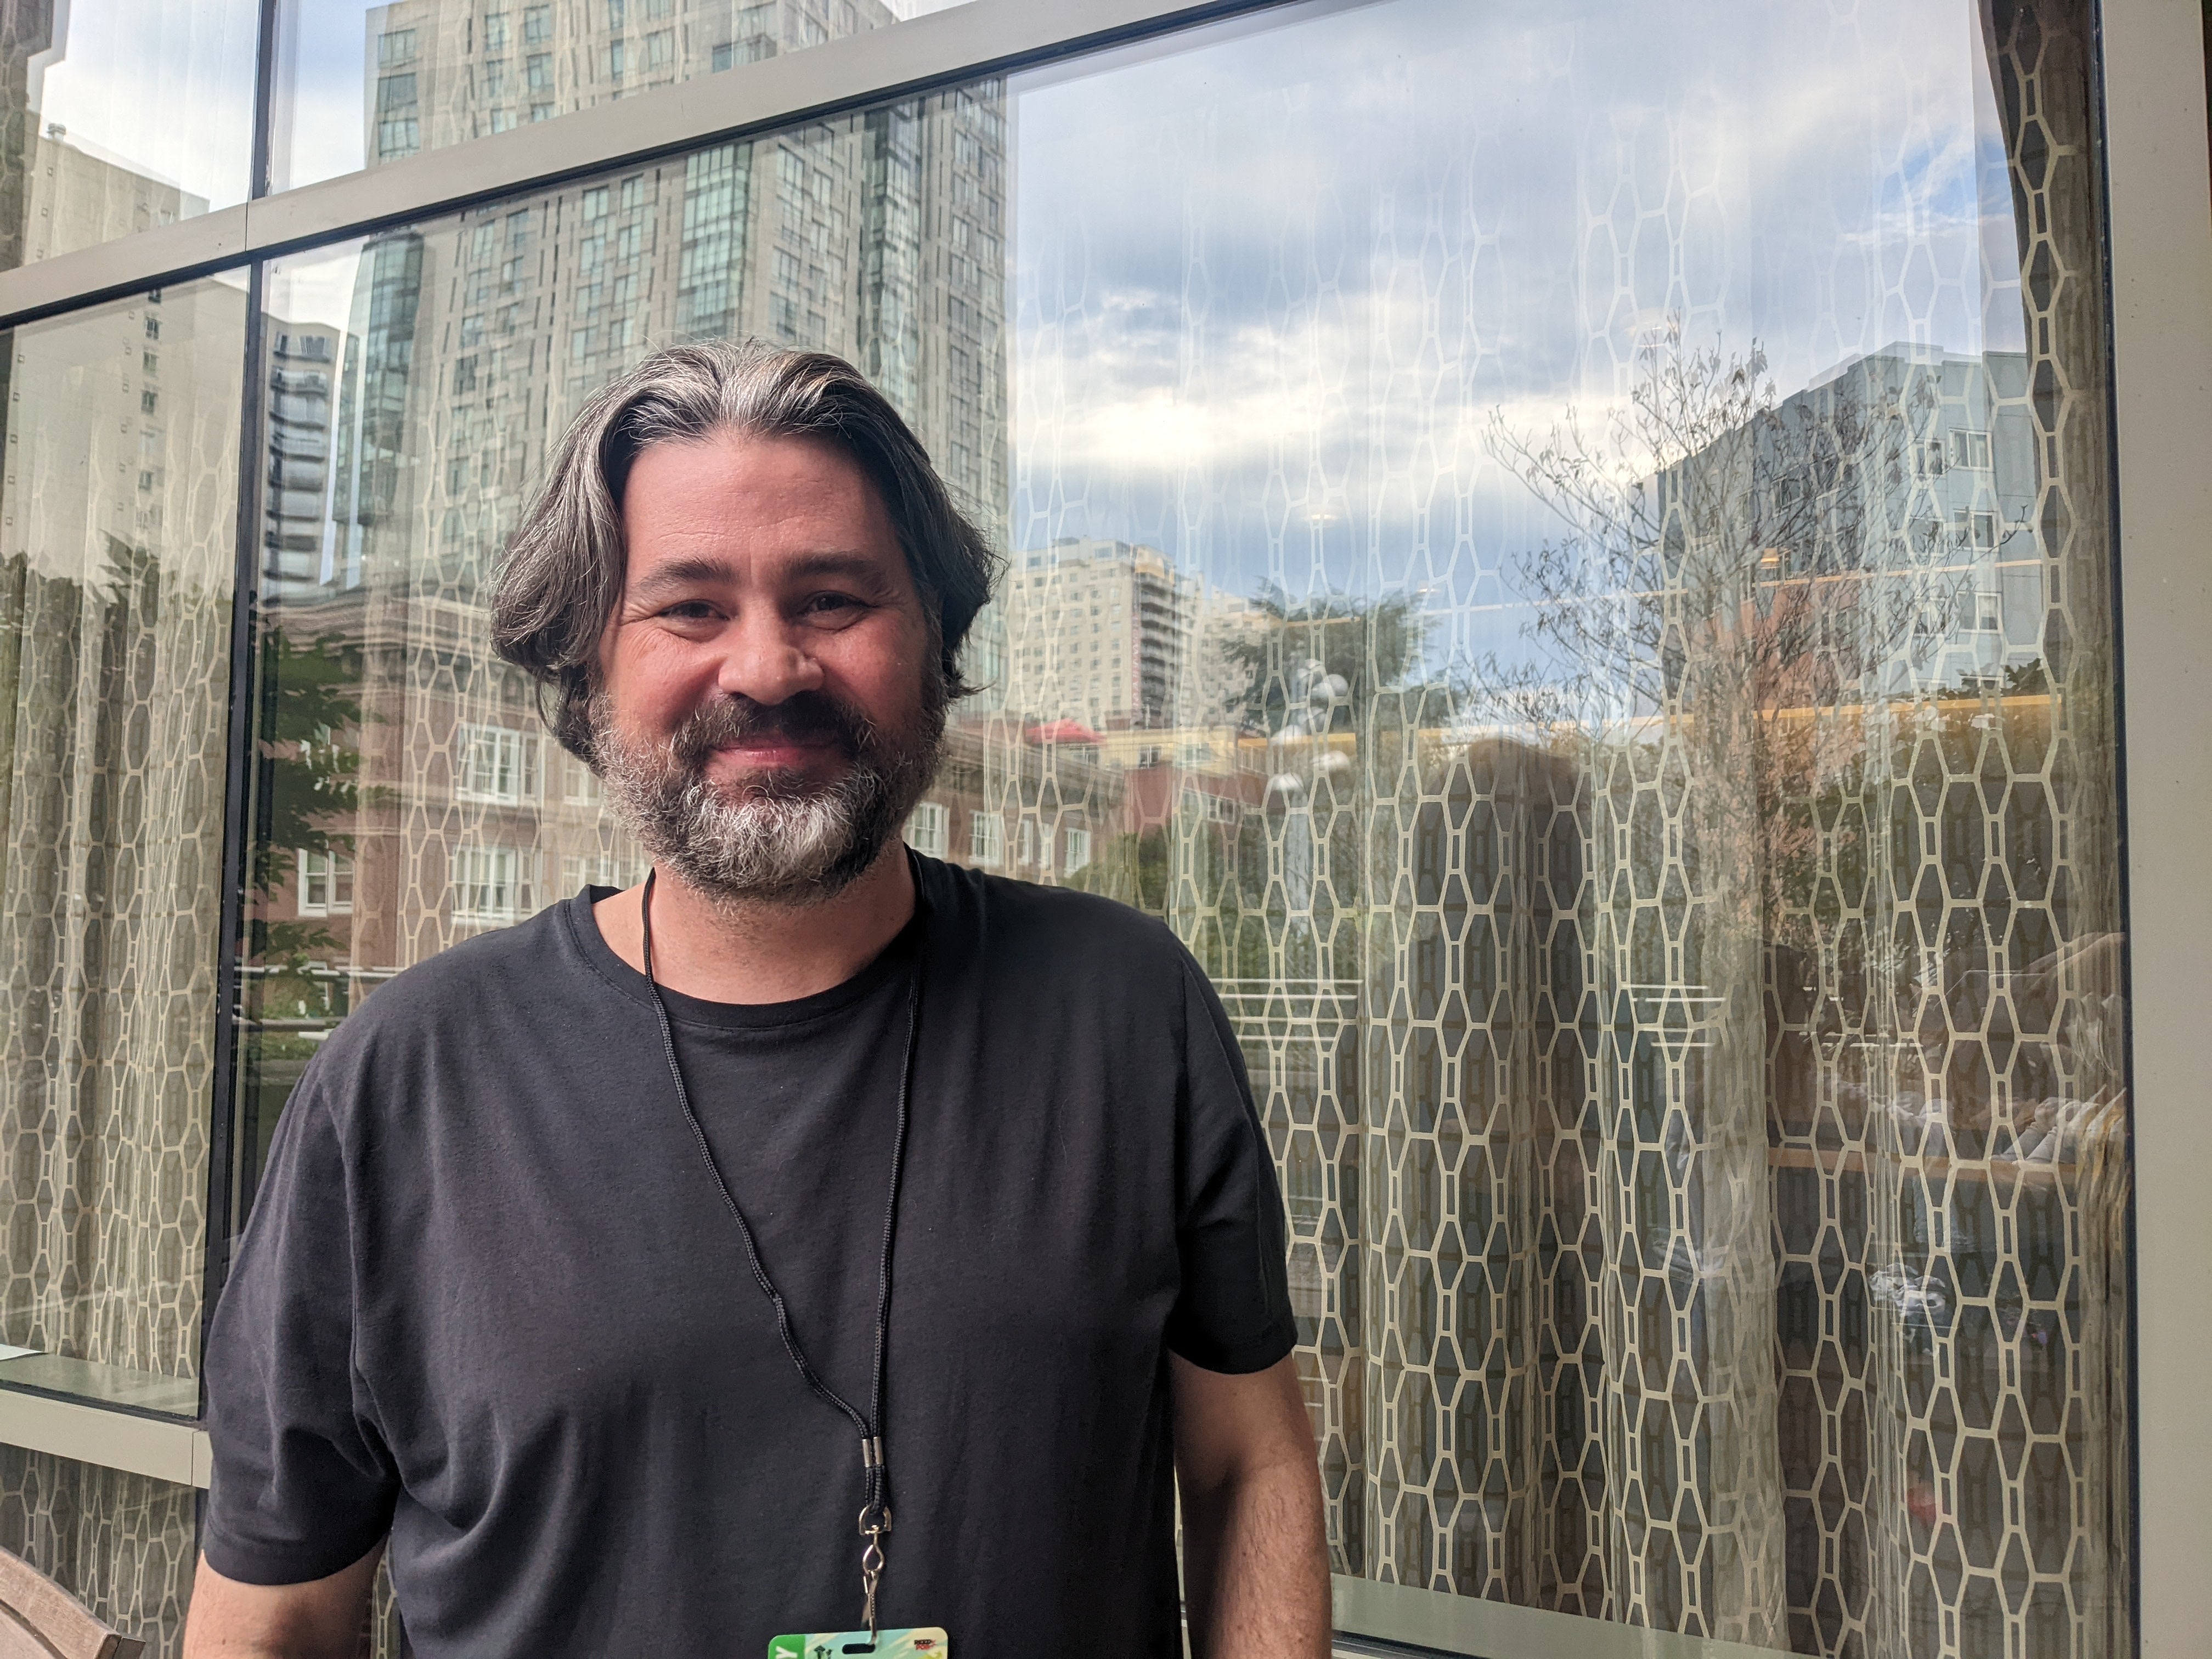 Jonathan Hickman with a background of an exterior of a window and curtain